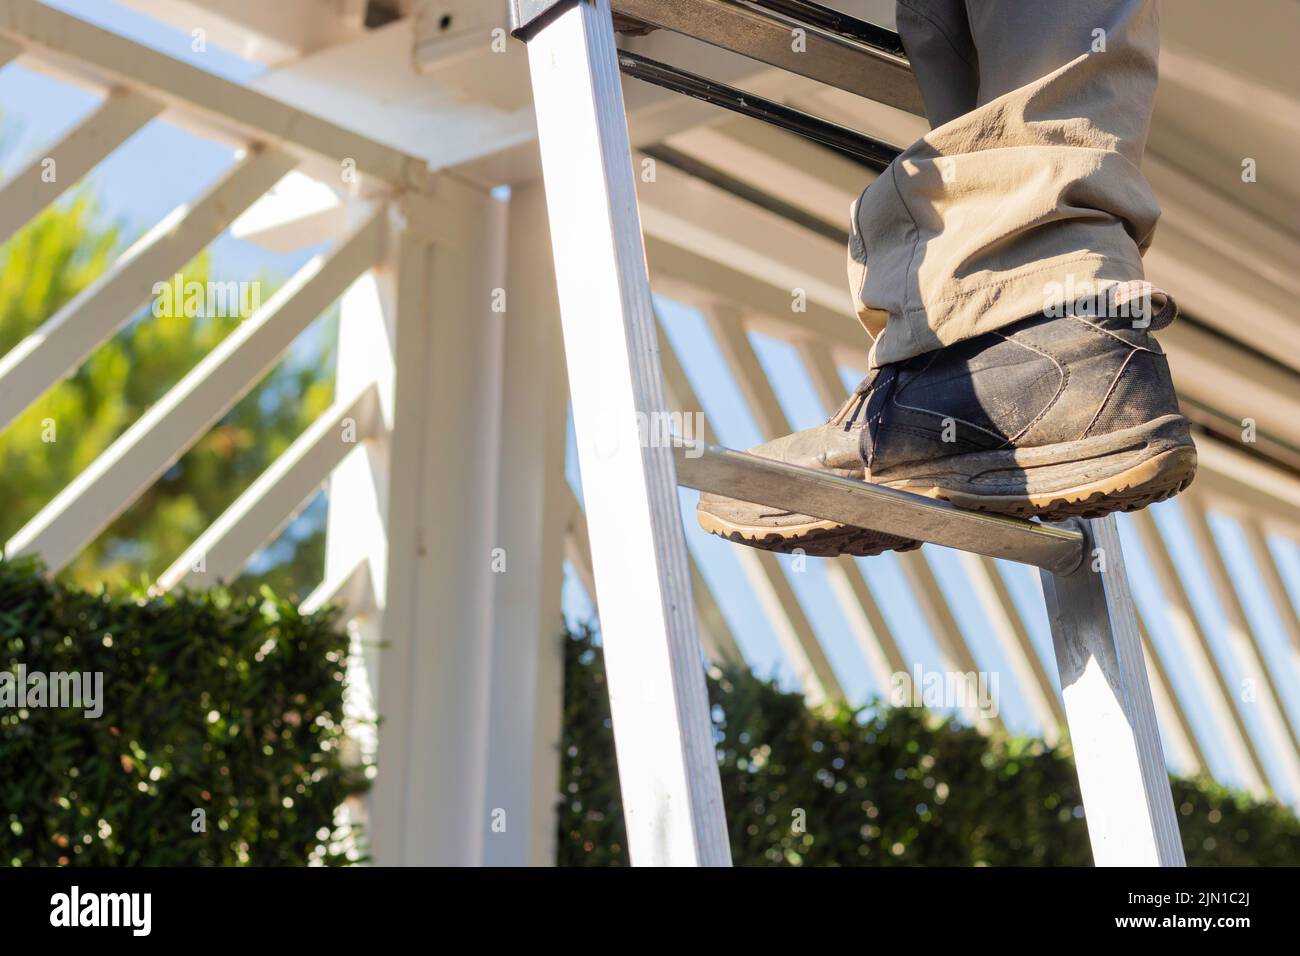 Close up view of faceless person climbing the ladder while working on the roof of a house. Security shoe at work concept with light Stock Photo